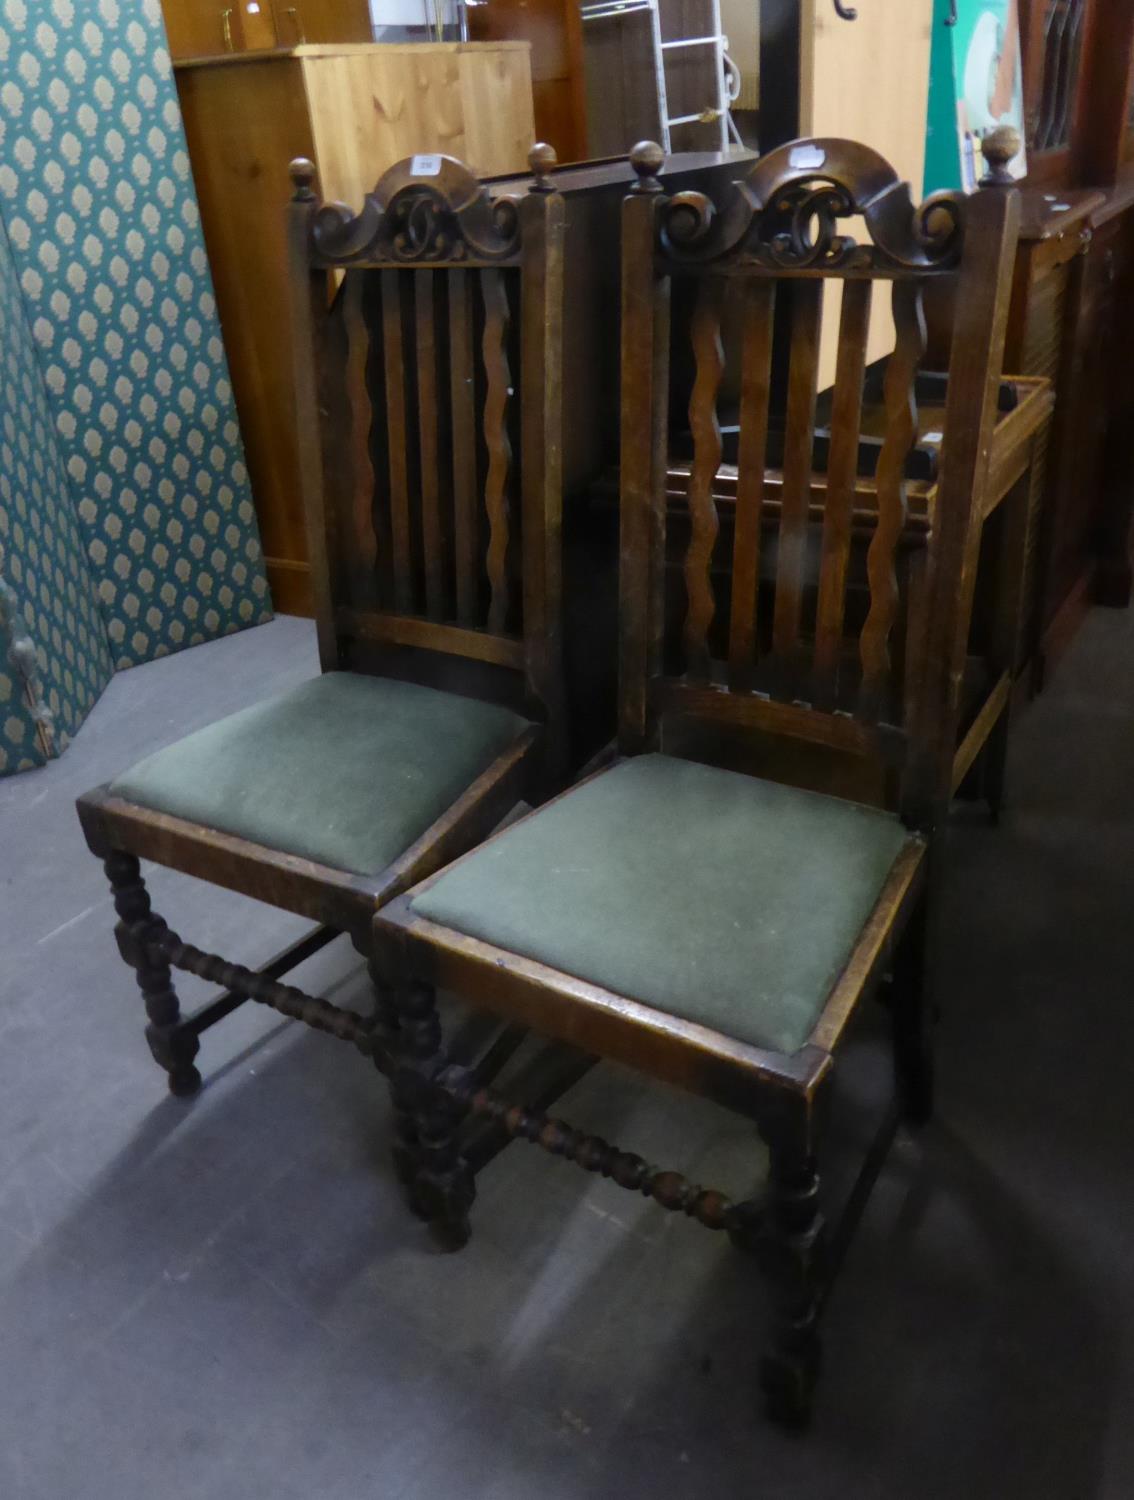 A PAIR OF OAK RAIL BACK DINING CHAIRS, OF JACOBEAN STYLE